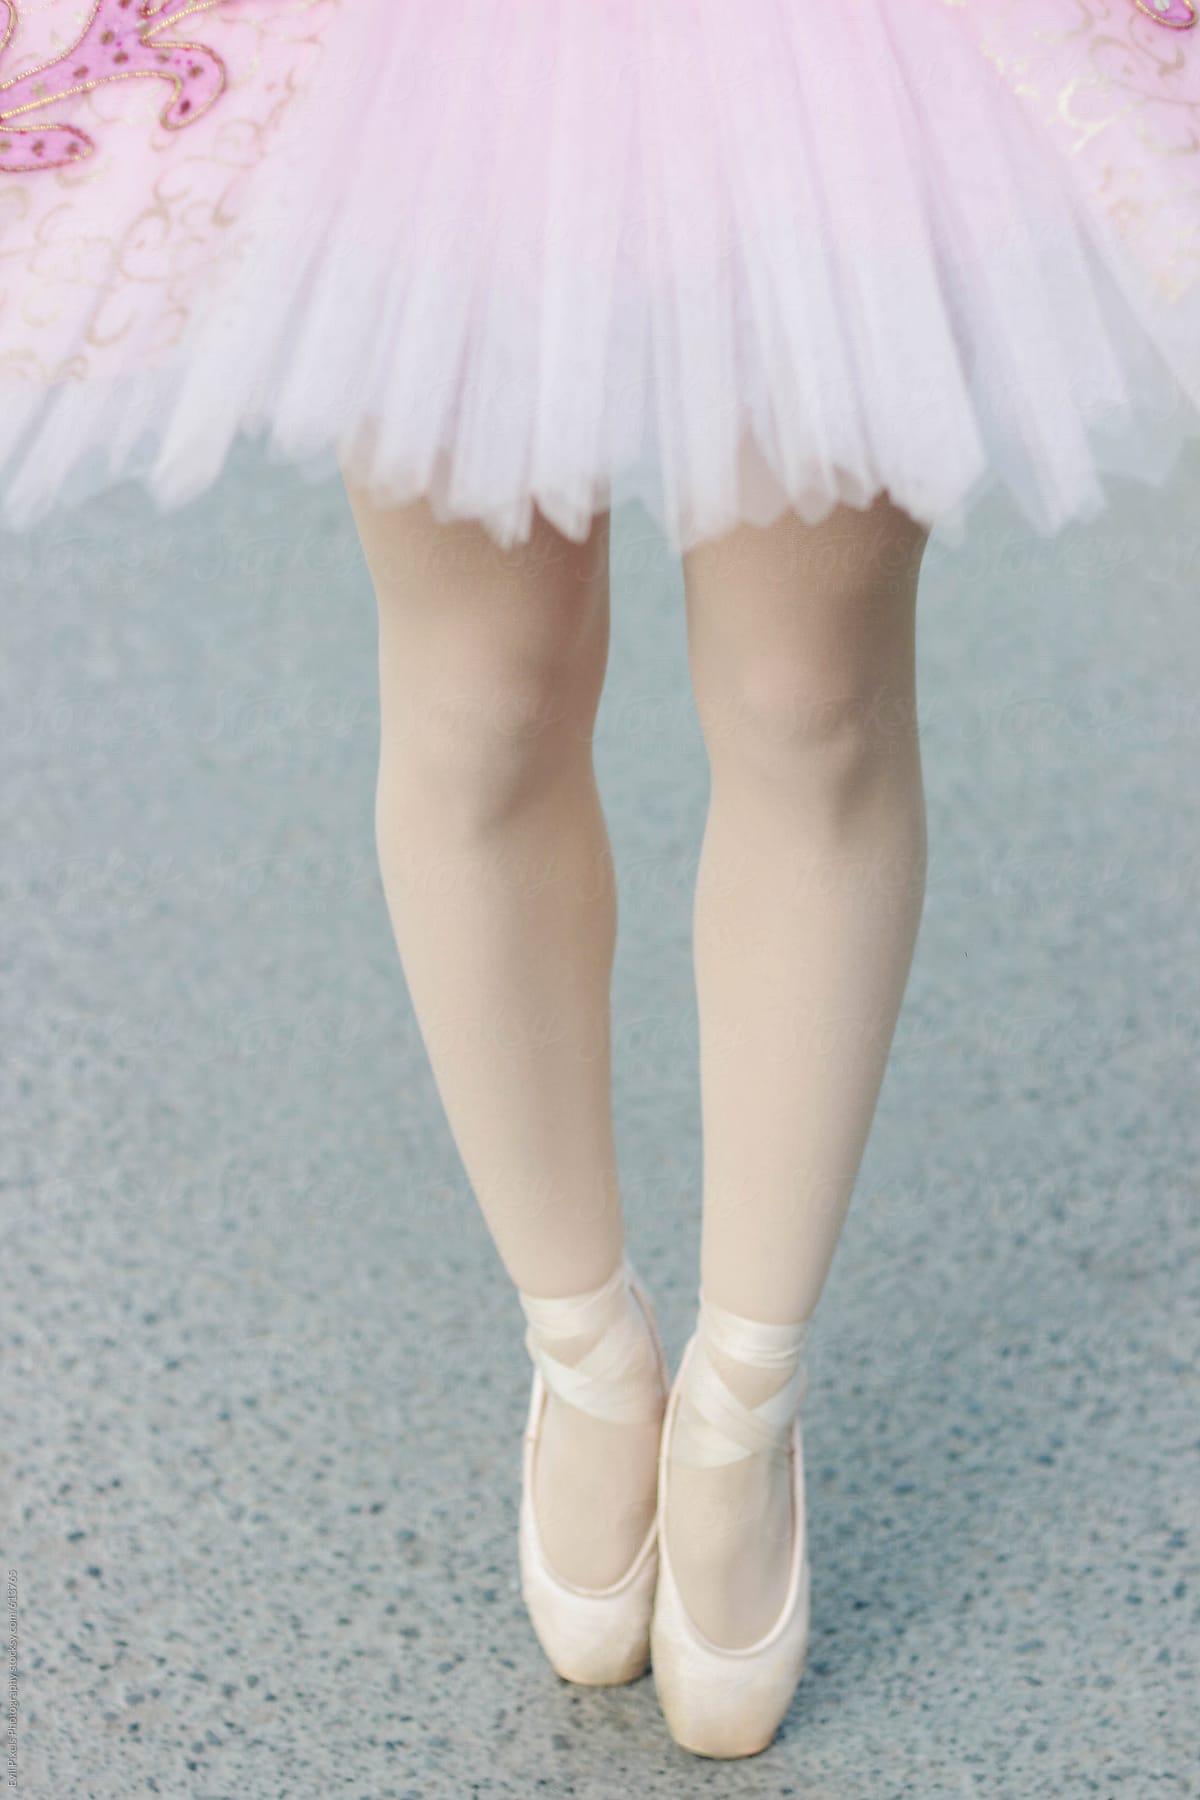 Female in romantic style ballet tutu and worn ballet shoes